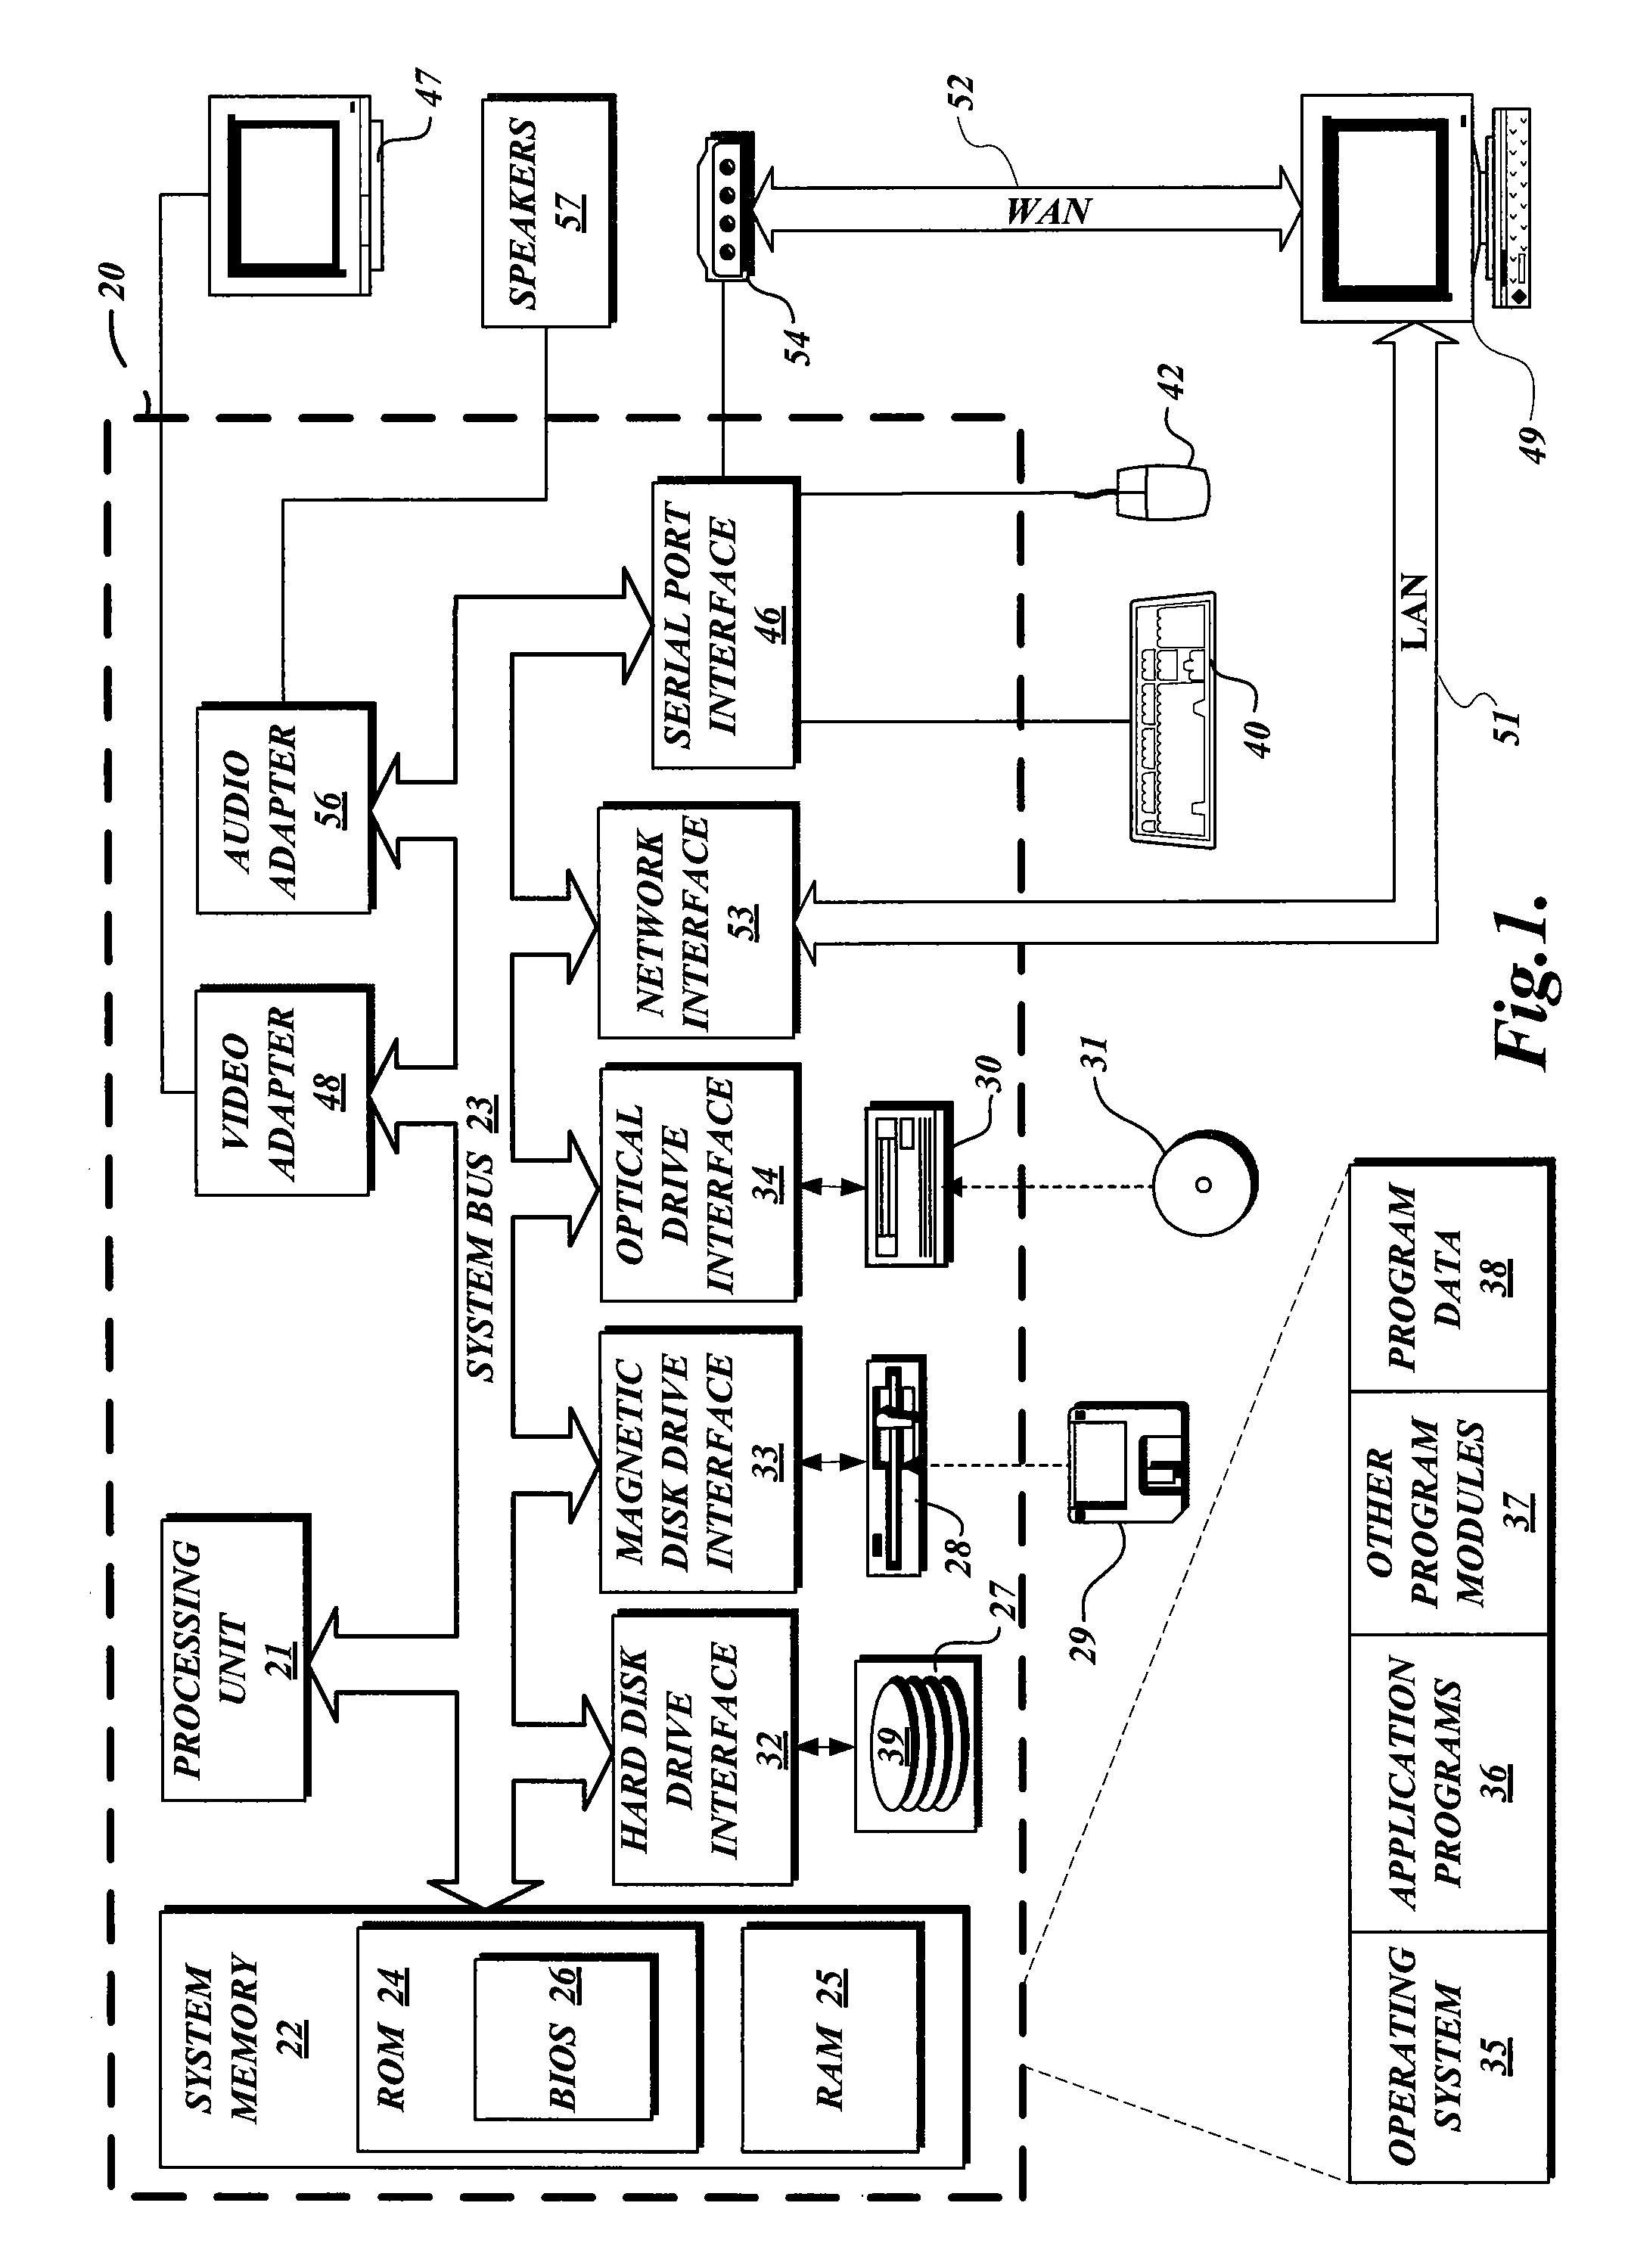 System and Method for Filtering and Organizing Items Based on Common Elements